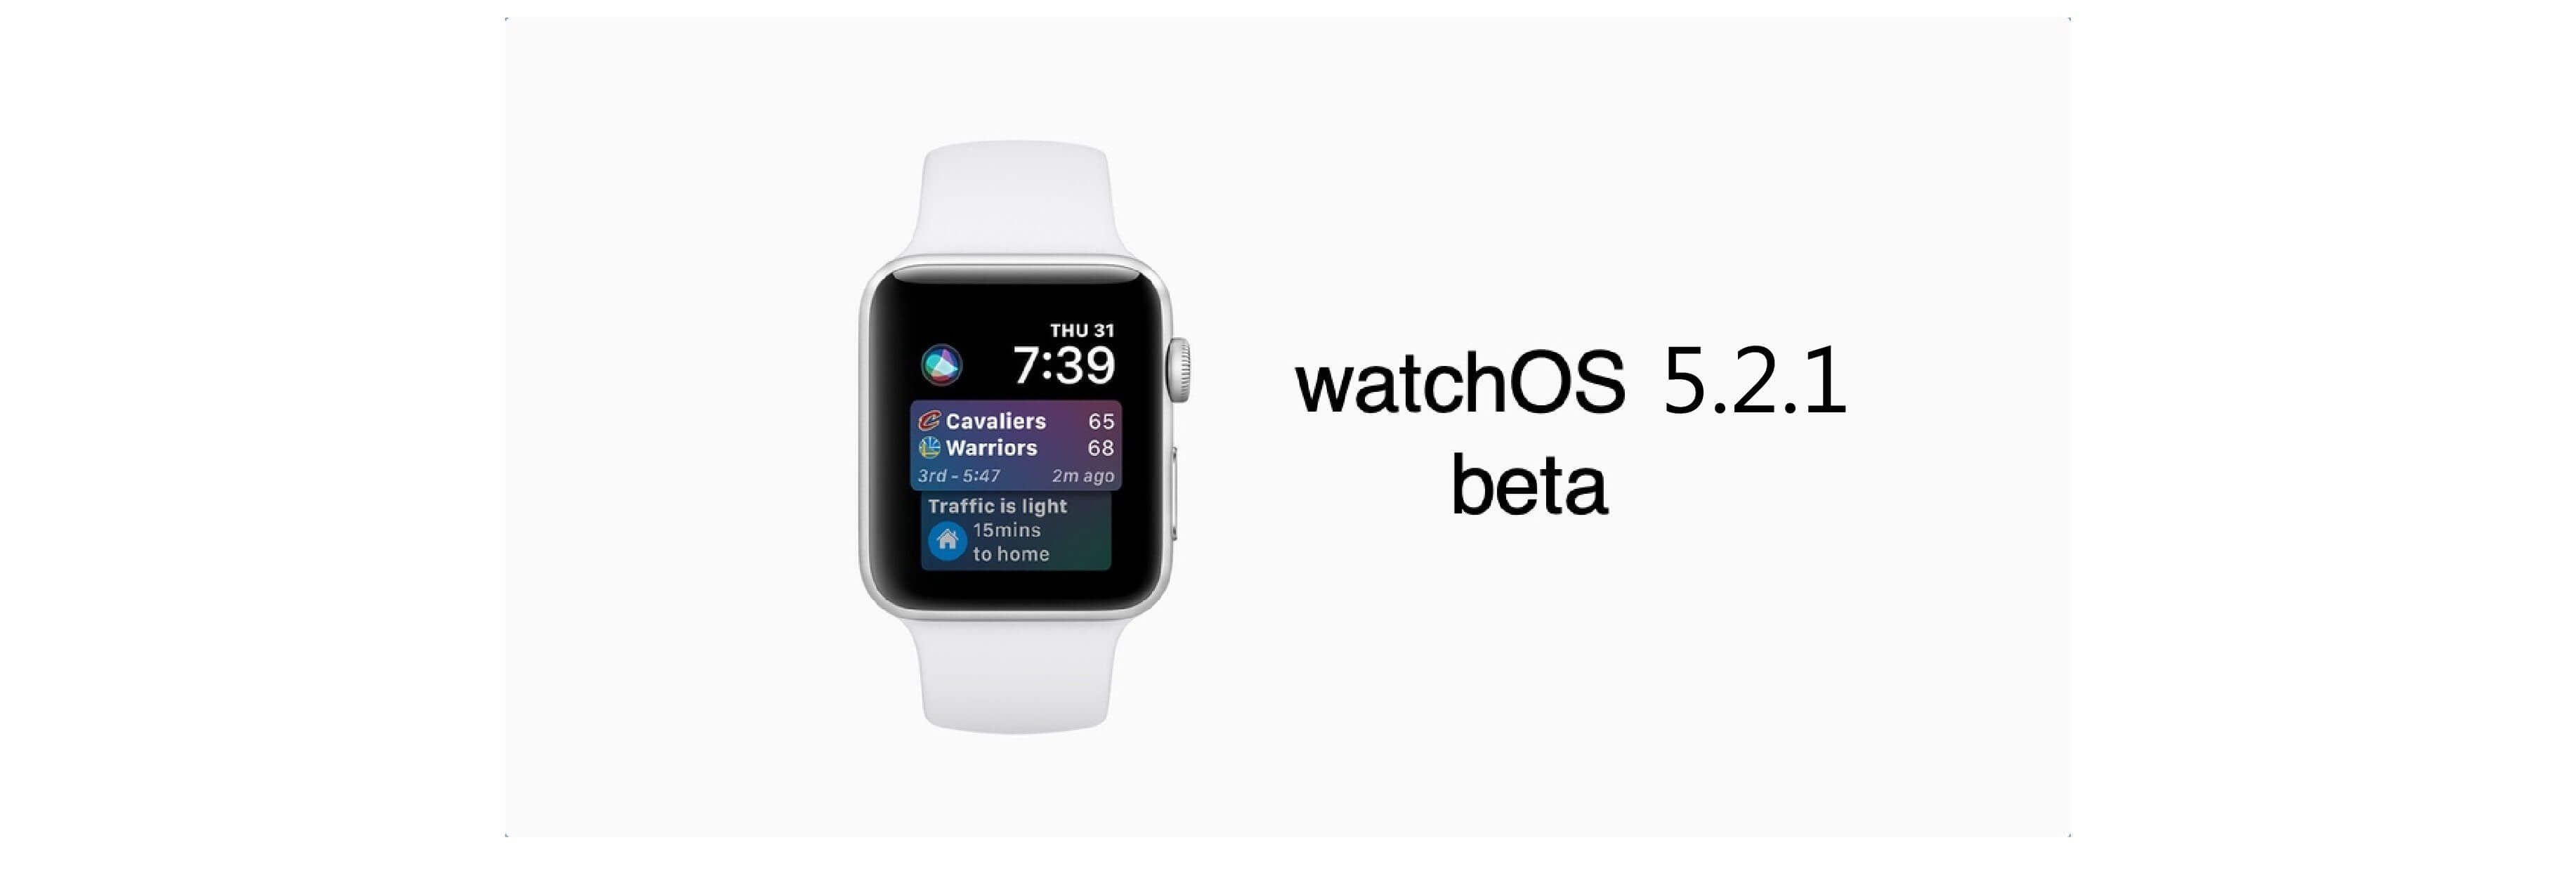 How to download watchOS 5.2.1 beta 3 to your Apple Watch